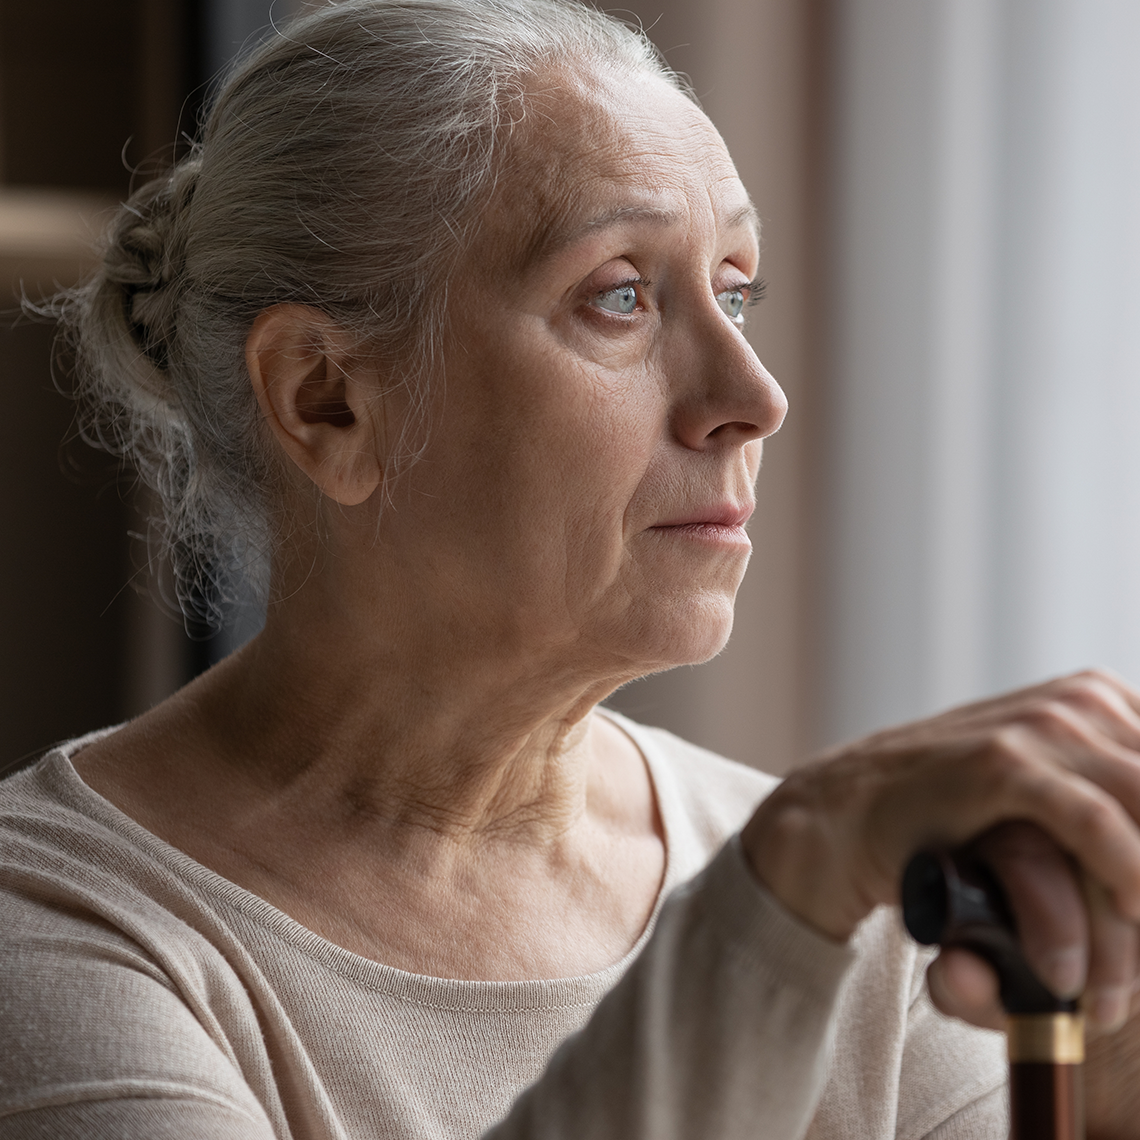 Elderly white woman in bun holds cane and looks thoughtfully out a window